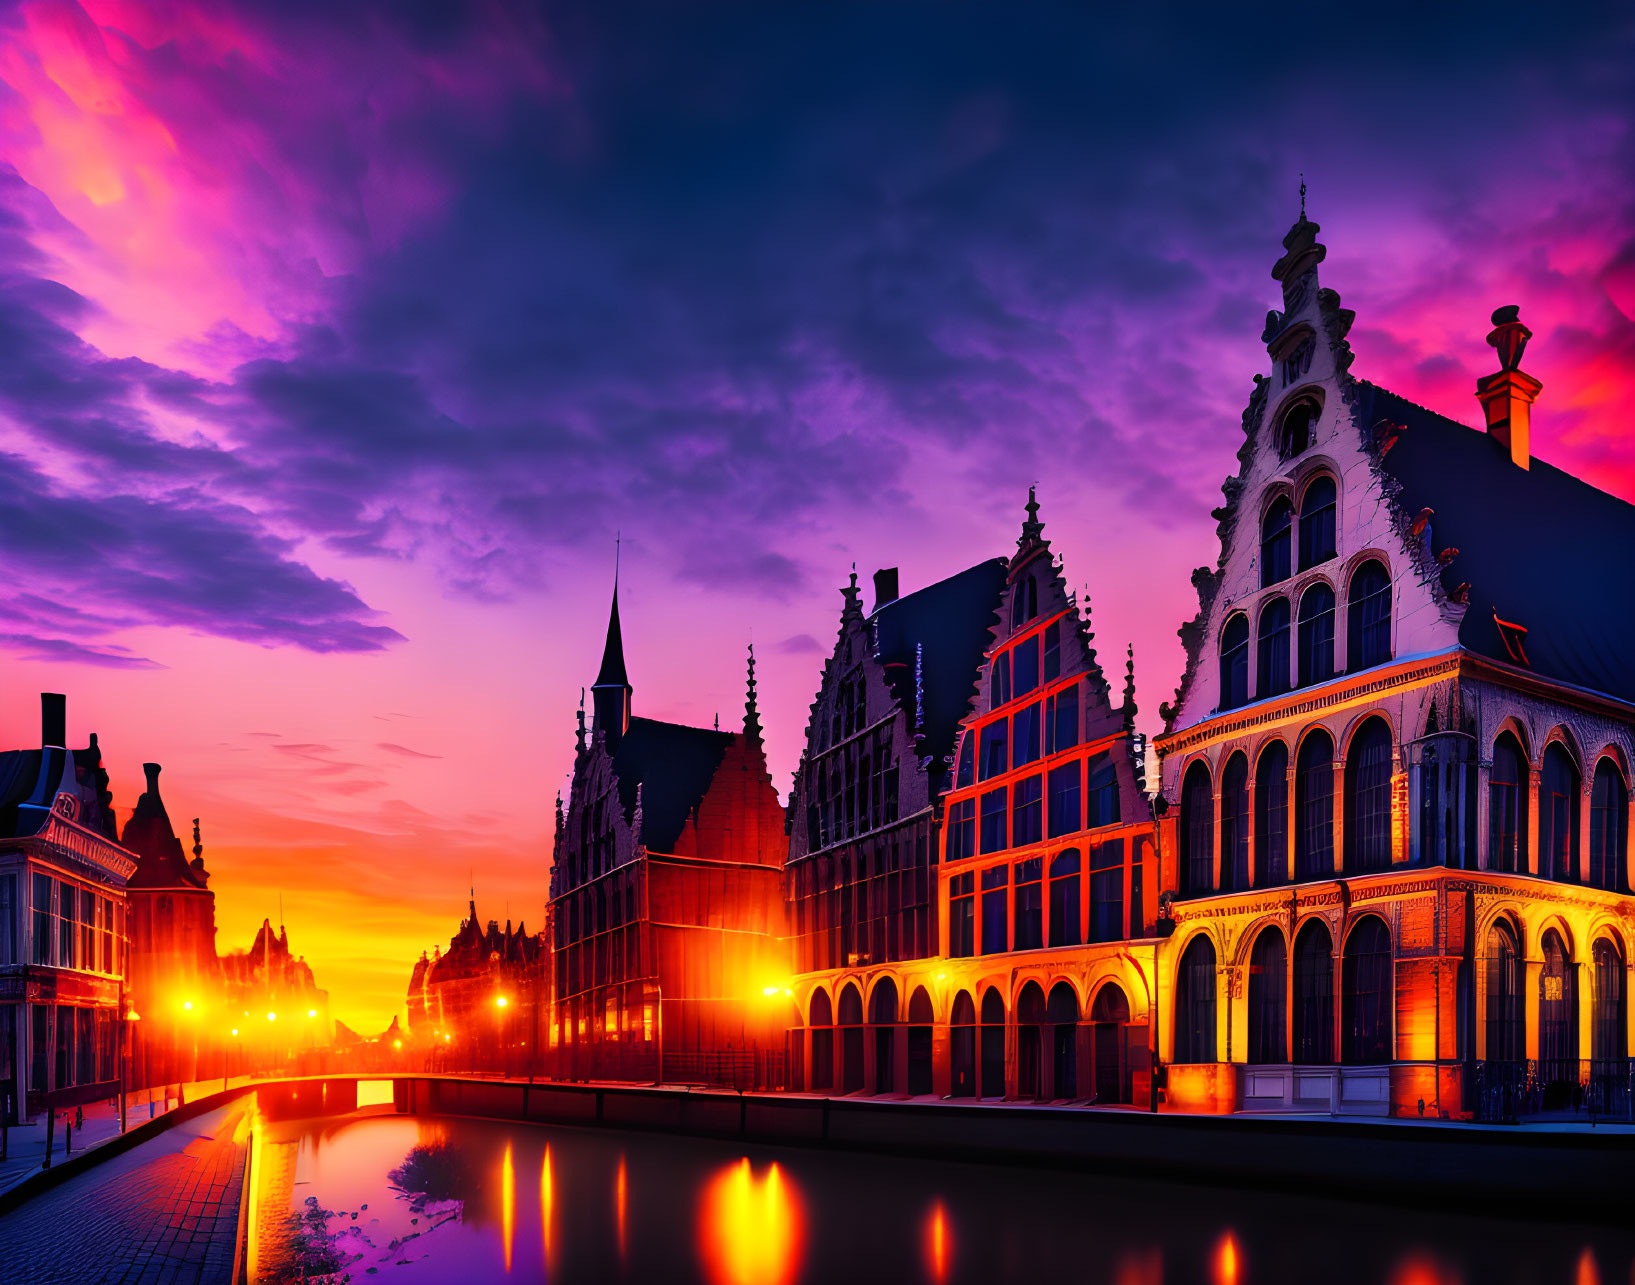 Historic European buildings by canal: vibrant purple and orange sunset reflection.